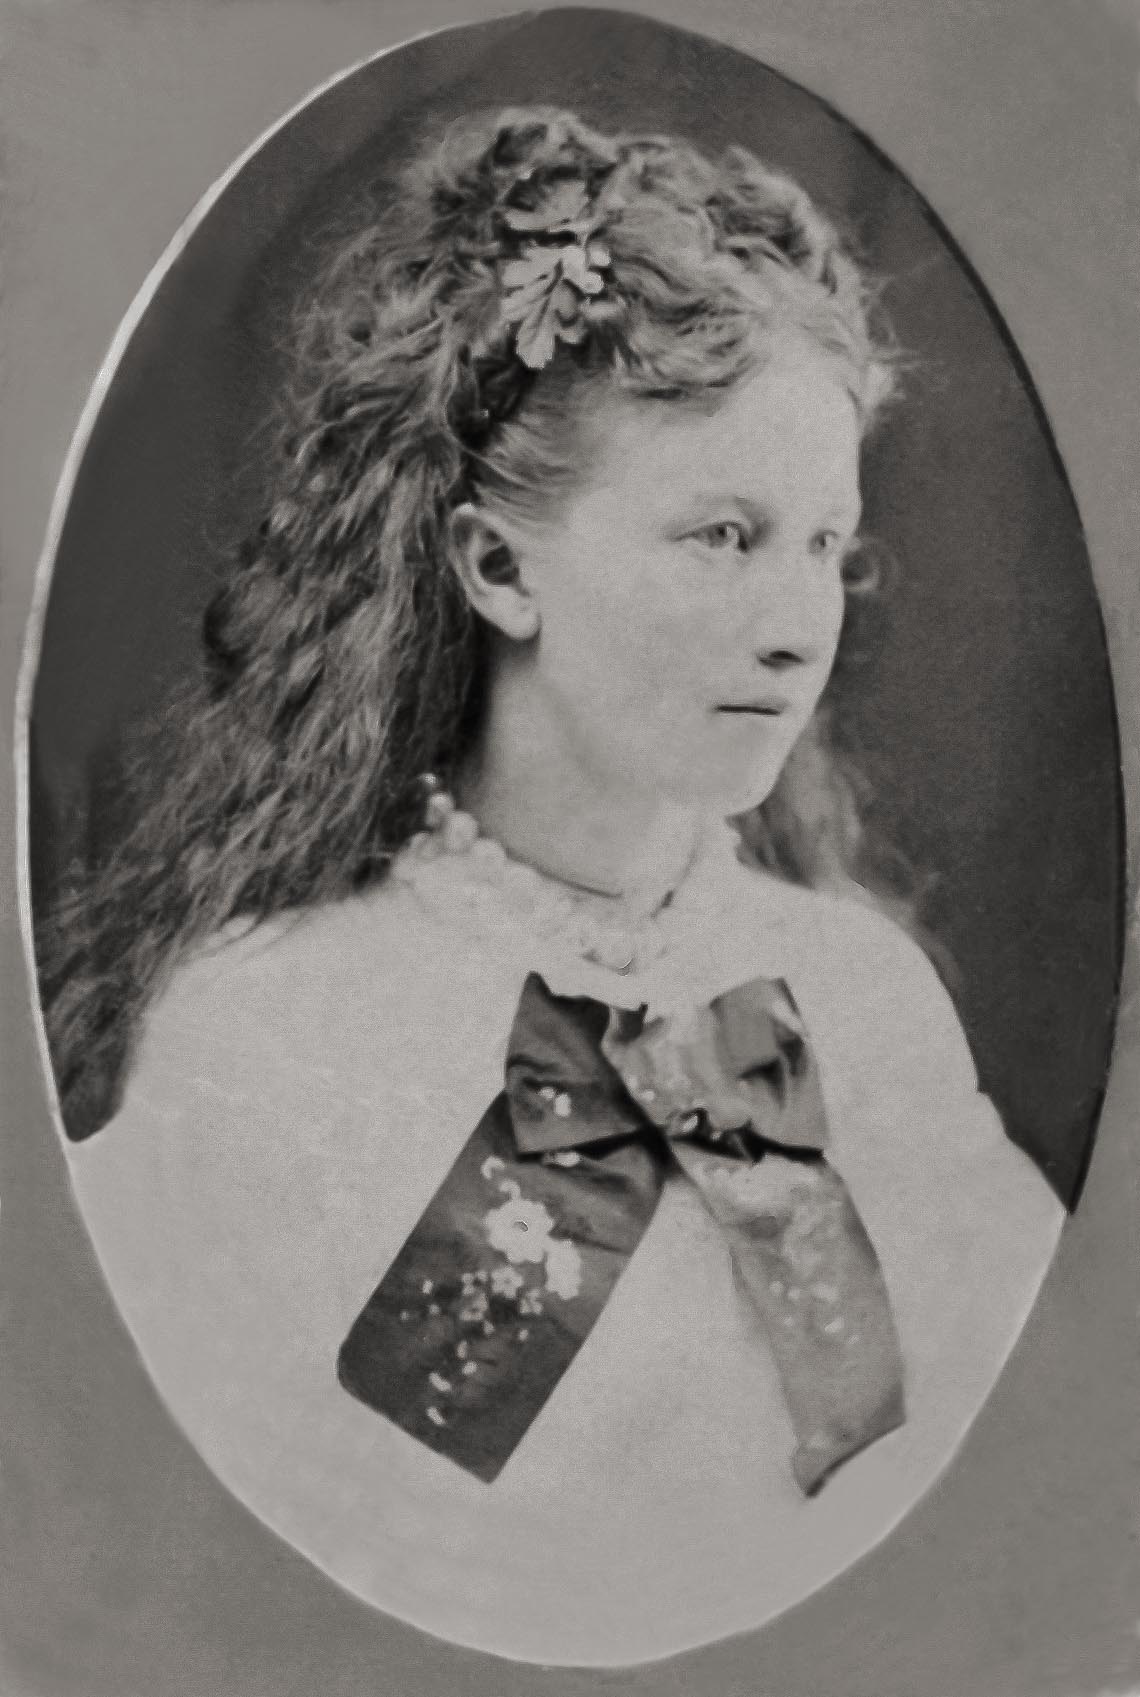 This is a portrait of my second great grandmother, circa 1868, when she was approximately 16 years old.  Likely taken in Owosso, Shiawassee county, Michigan